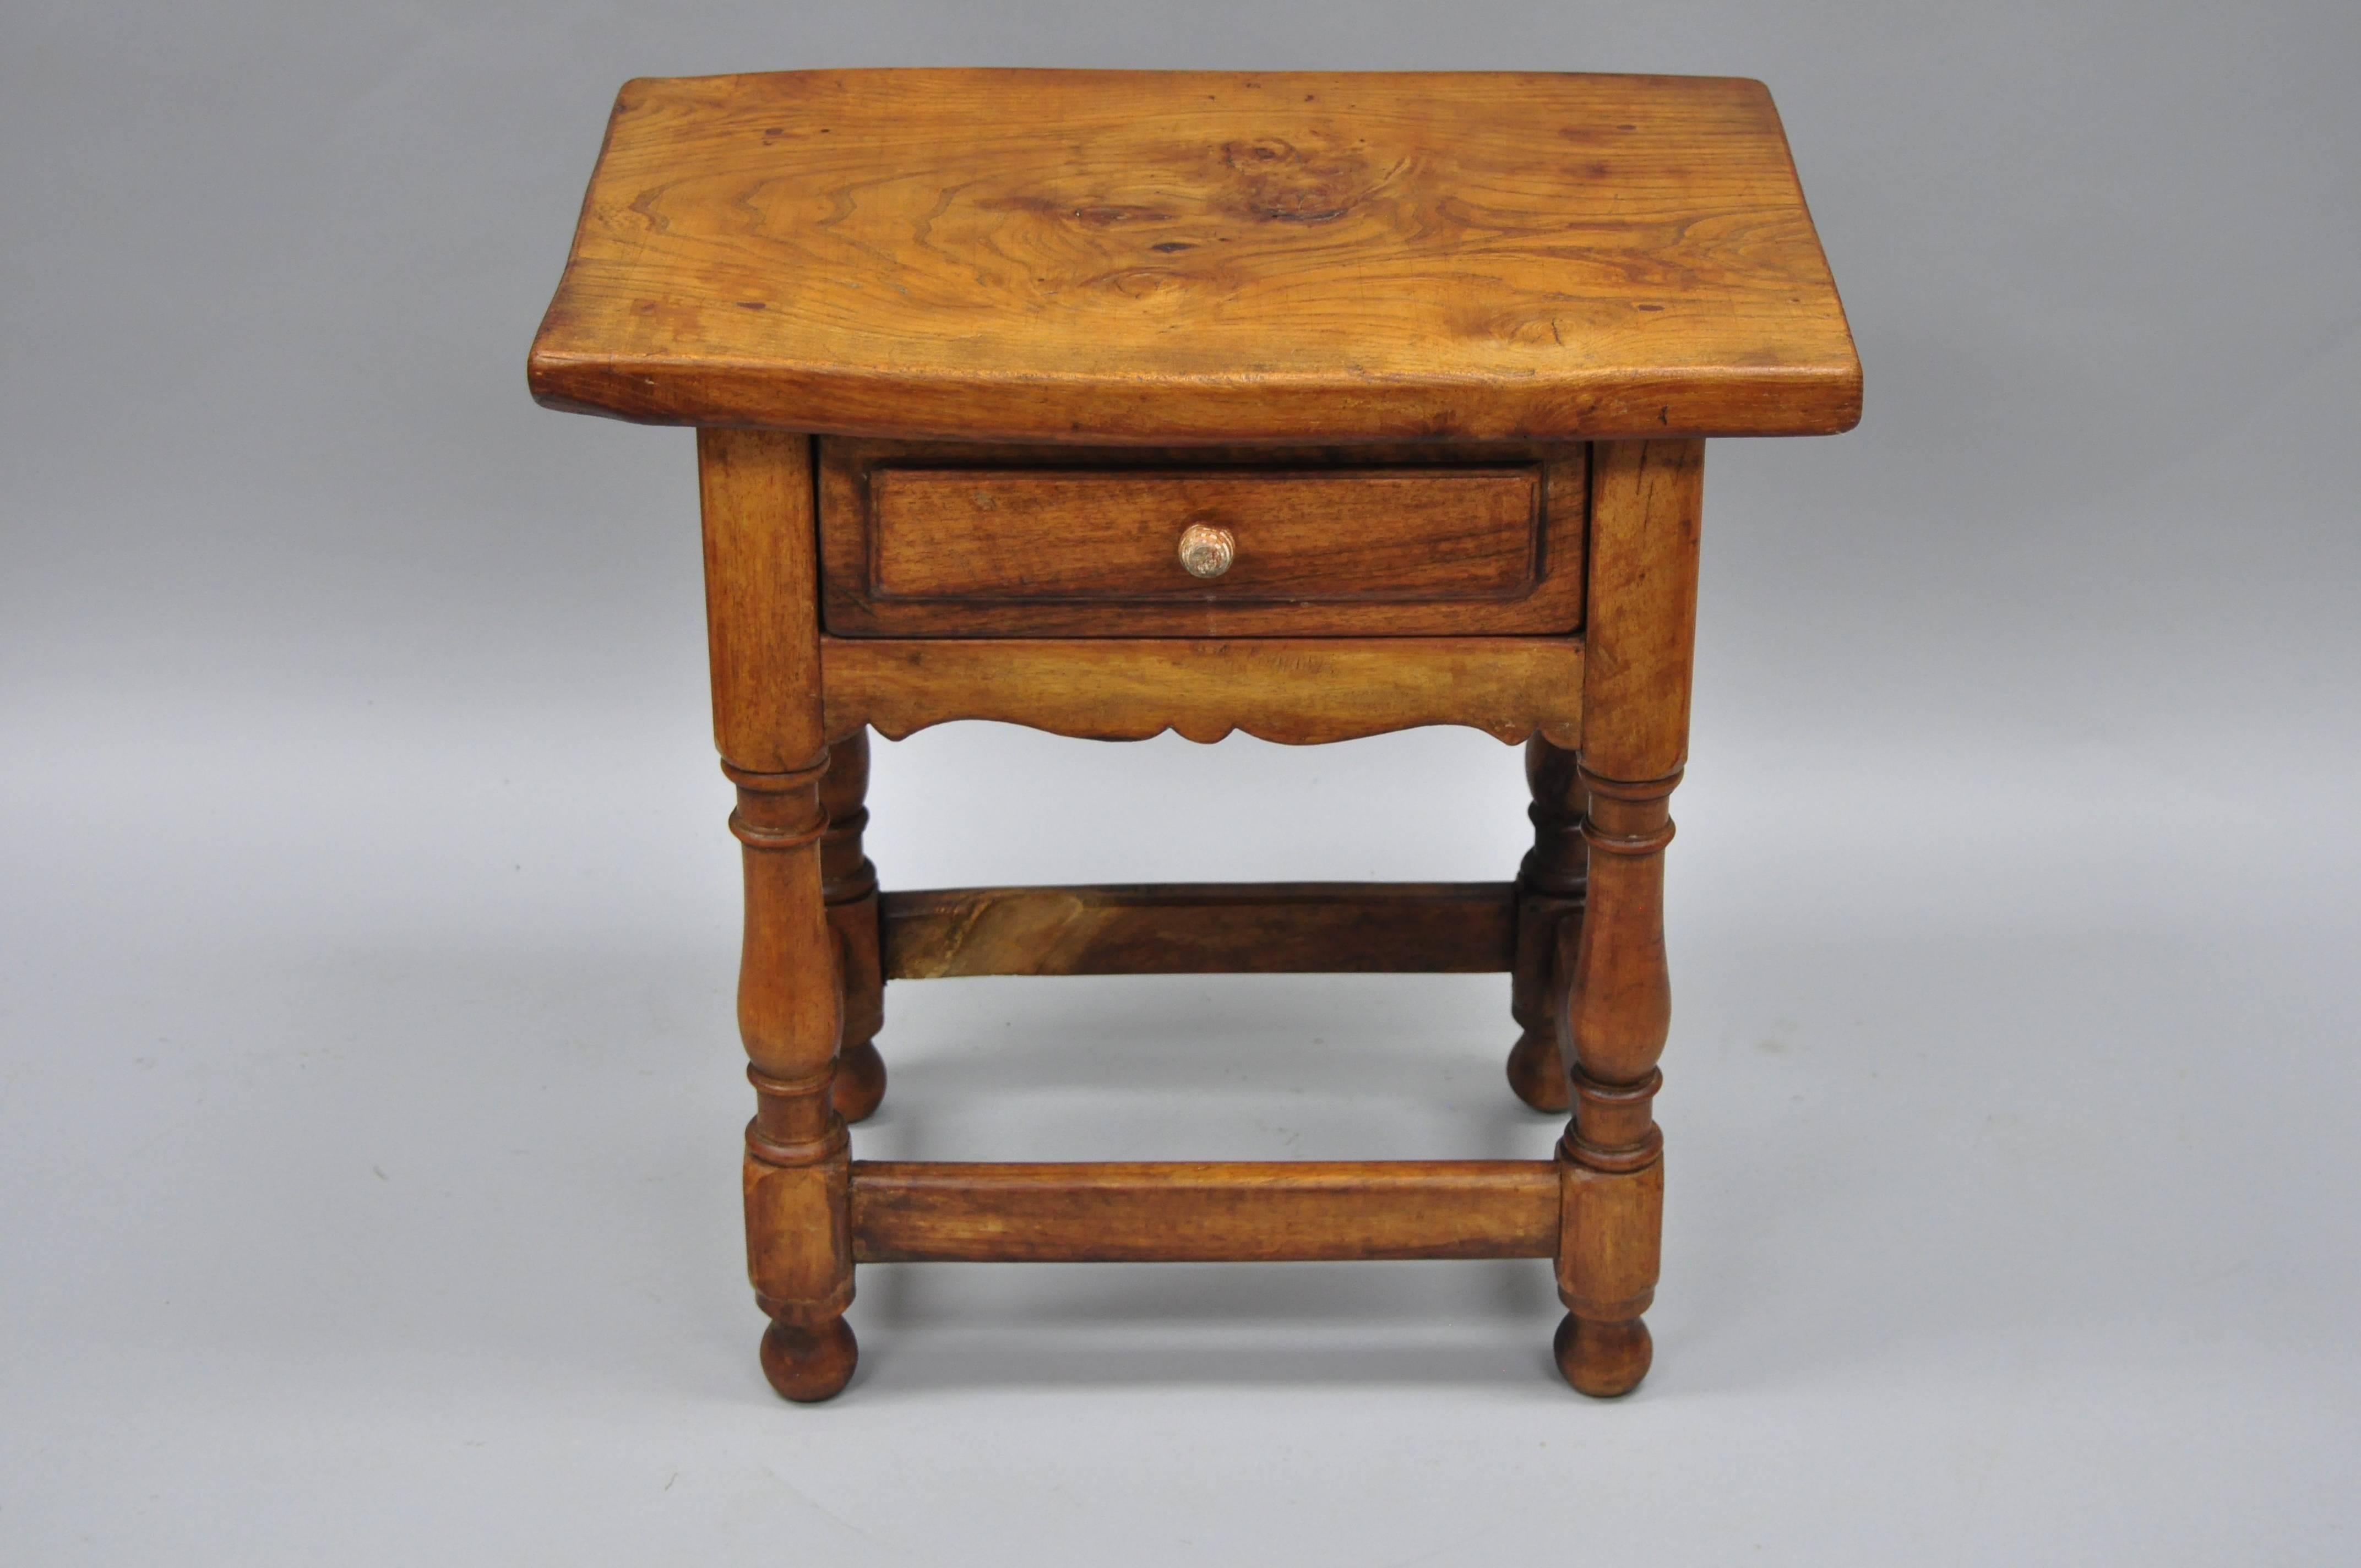 Small antique pine wood one drawer side table. Item features turn carved legs, stretcher base, beehive carved drawer pull, wonderful aged patina, solid wood construction, beautiful wood grain, one dovetailed drawer, and quality craftsmanship, circa